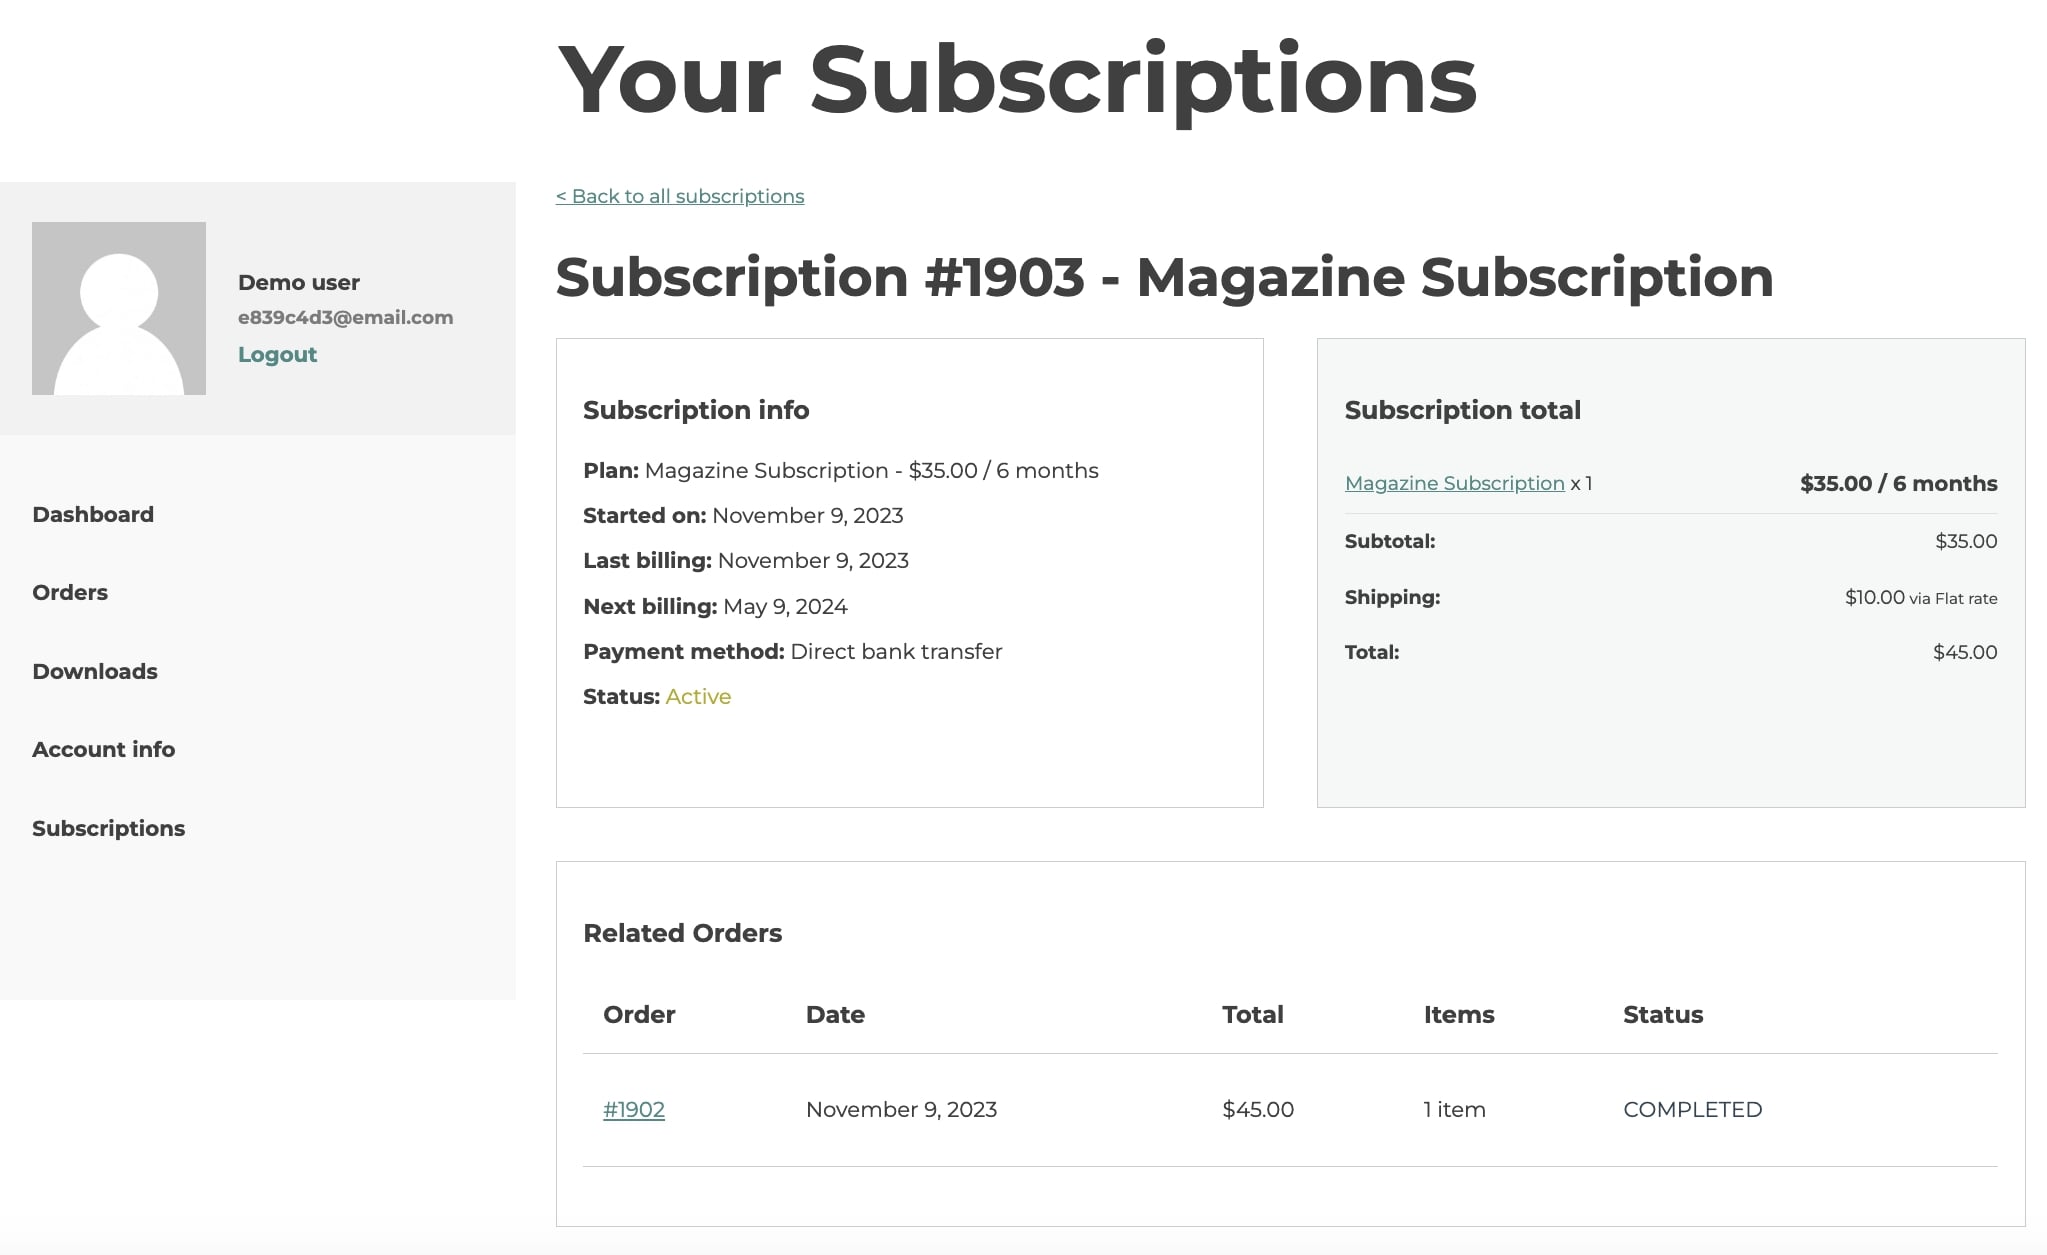 Subscription detail on 